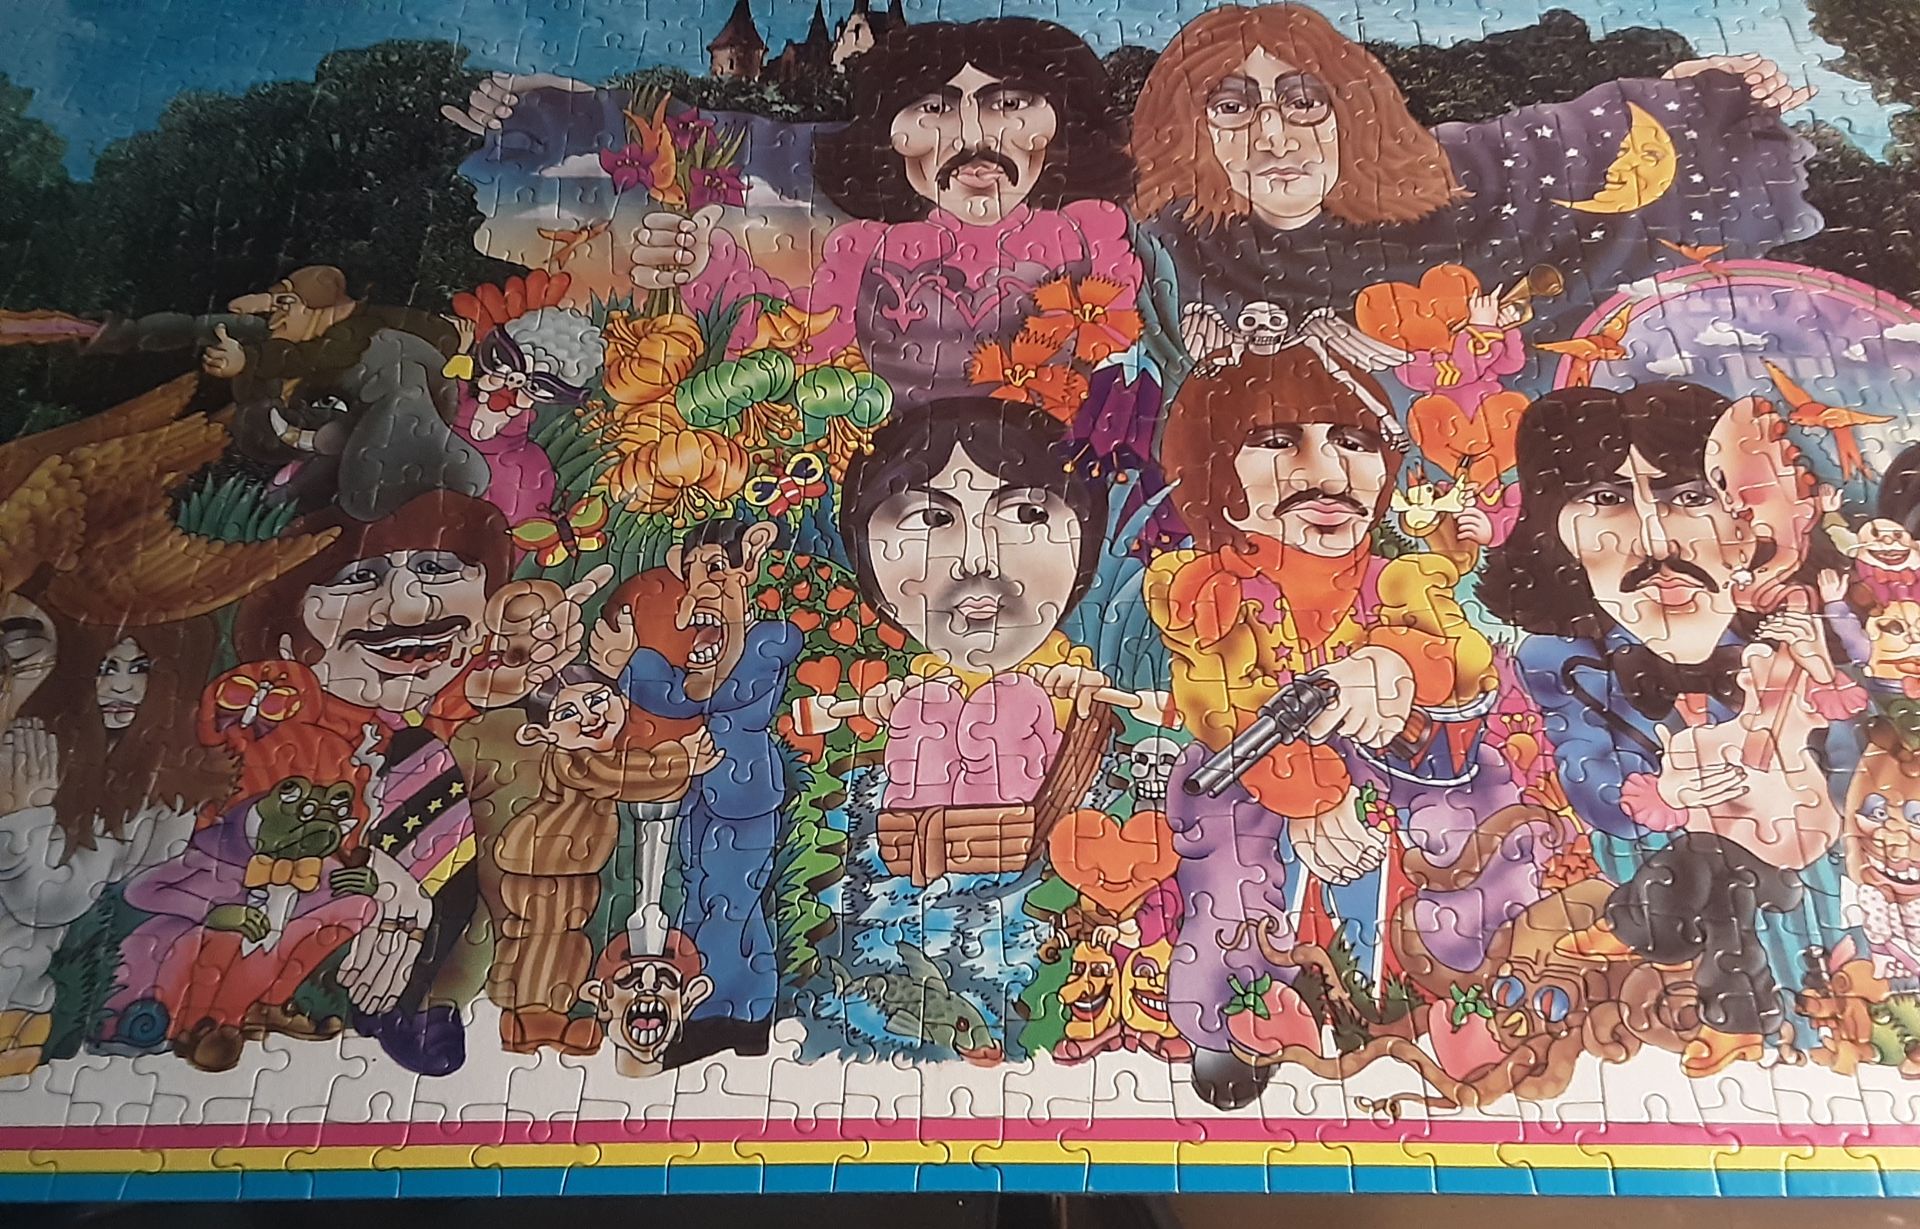 The Beatles illustrated lyrics Puzzle in a Puzzle jigsaw - 800 pieces, - Image 7 of 10